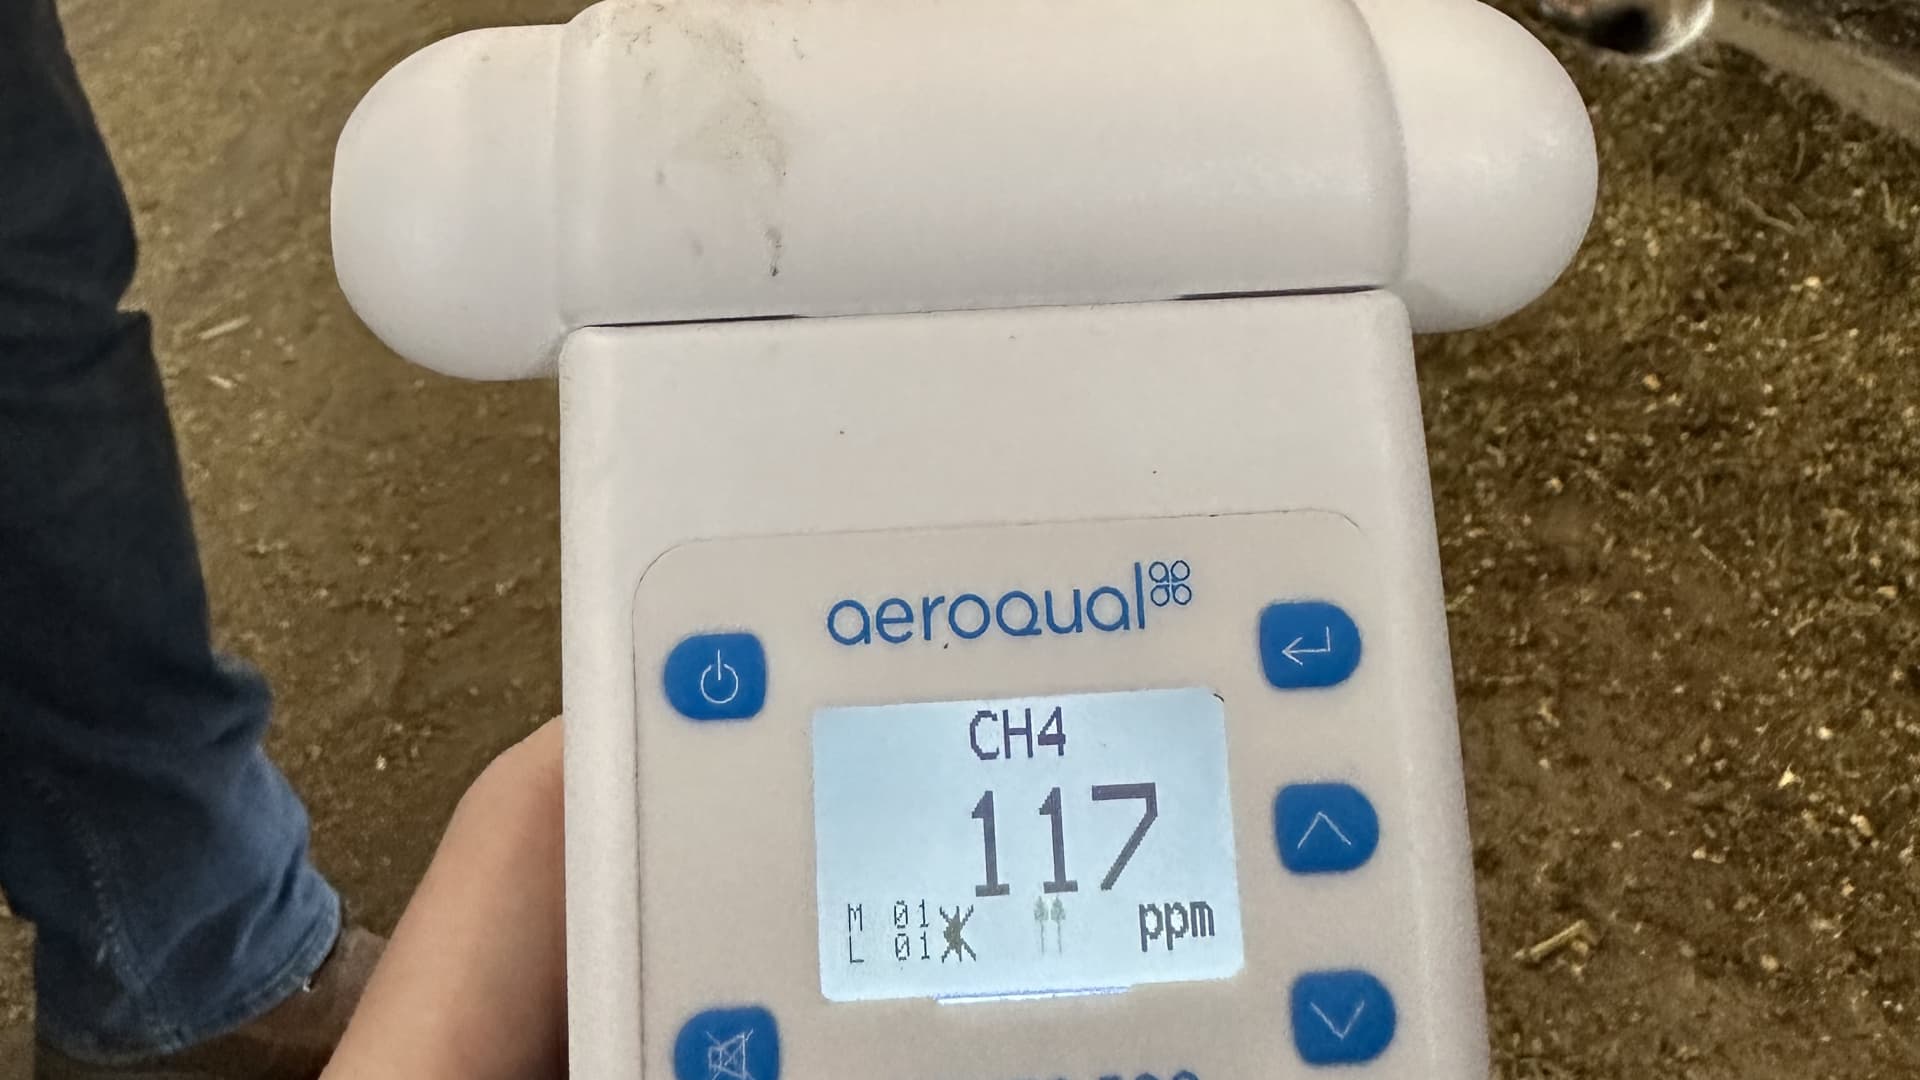 Measuring the methane in a dairy barn in 2022. Normal atmospheric conditions are supposed to be at 1.8 ppm, so this reading is more than 60 times higher than average. 